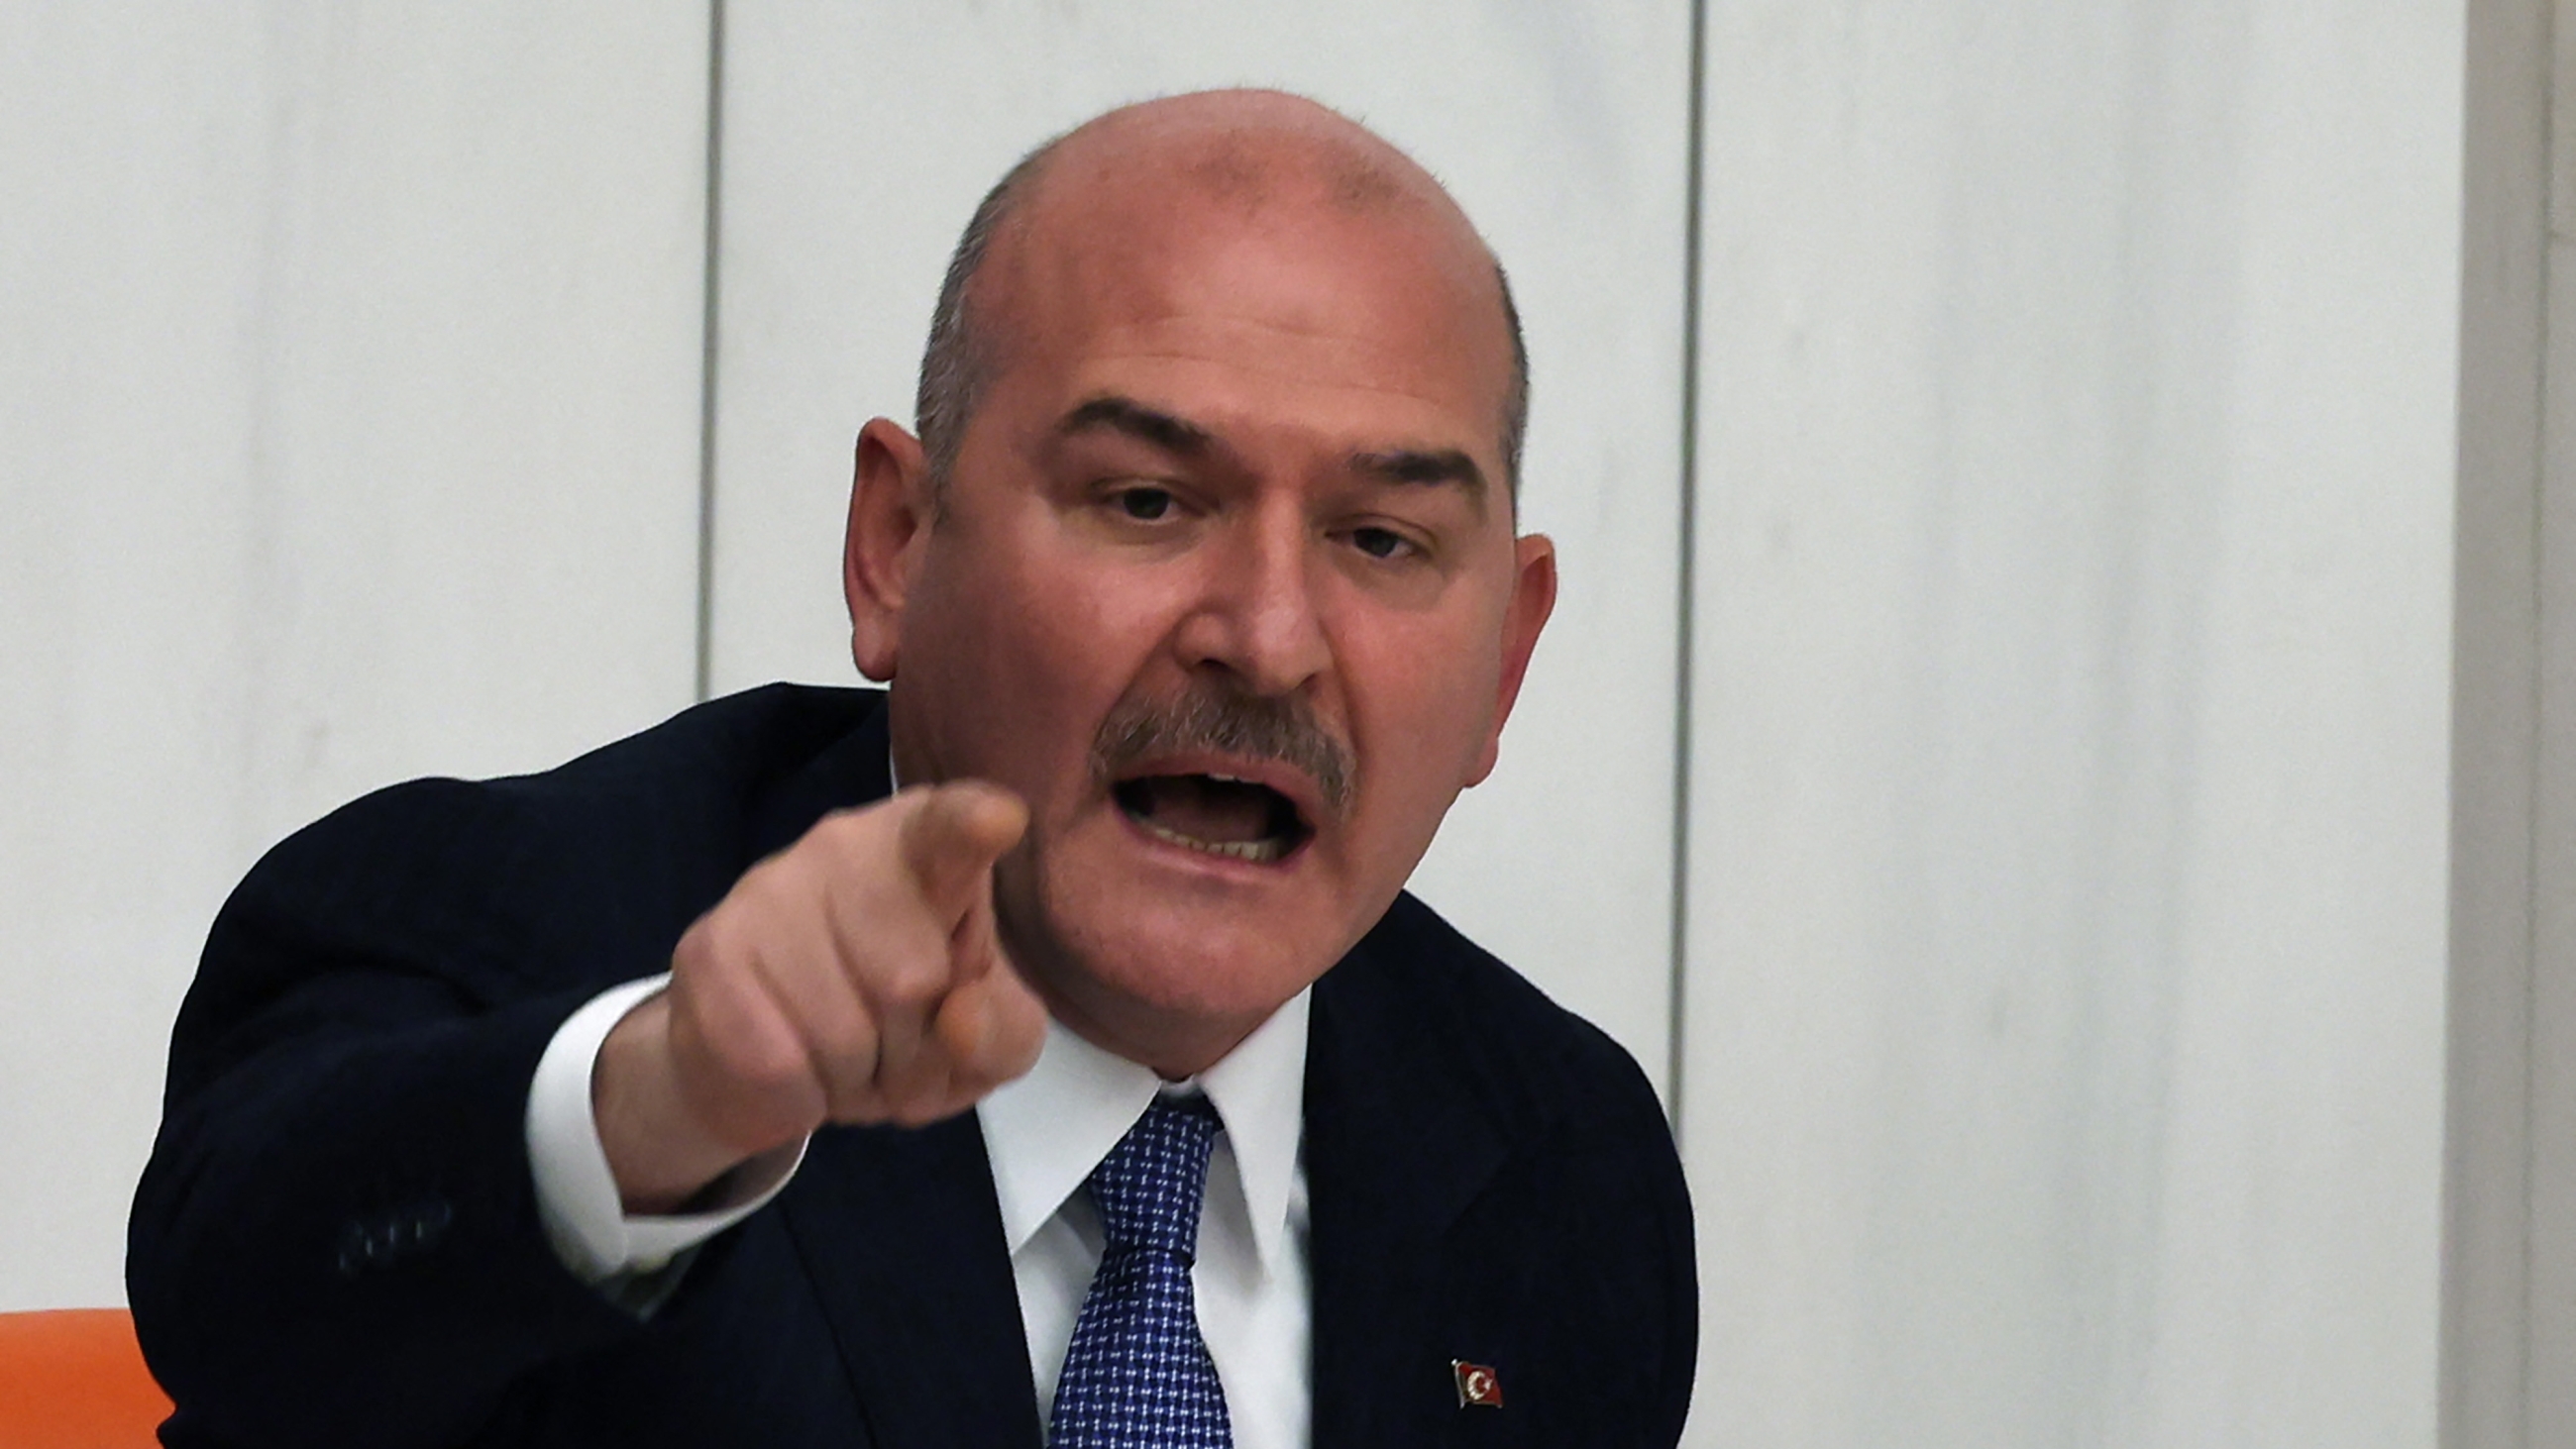 Turkey's Minister of Interior, Suleyman Soylu argues with opposition MPs during the negotiations for the 2023 budget in parliament on 10 December 2022 in Ankara (AFP)